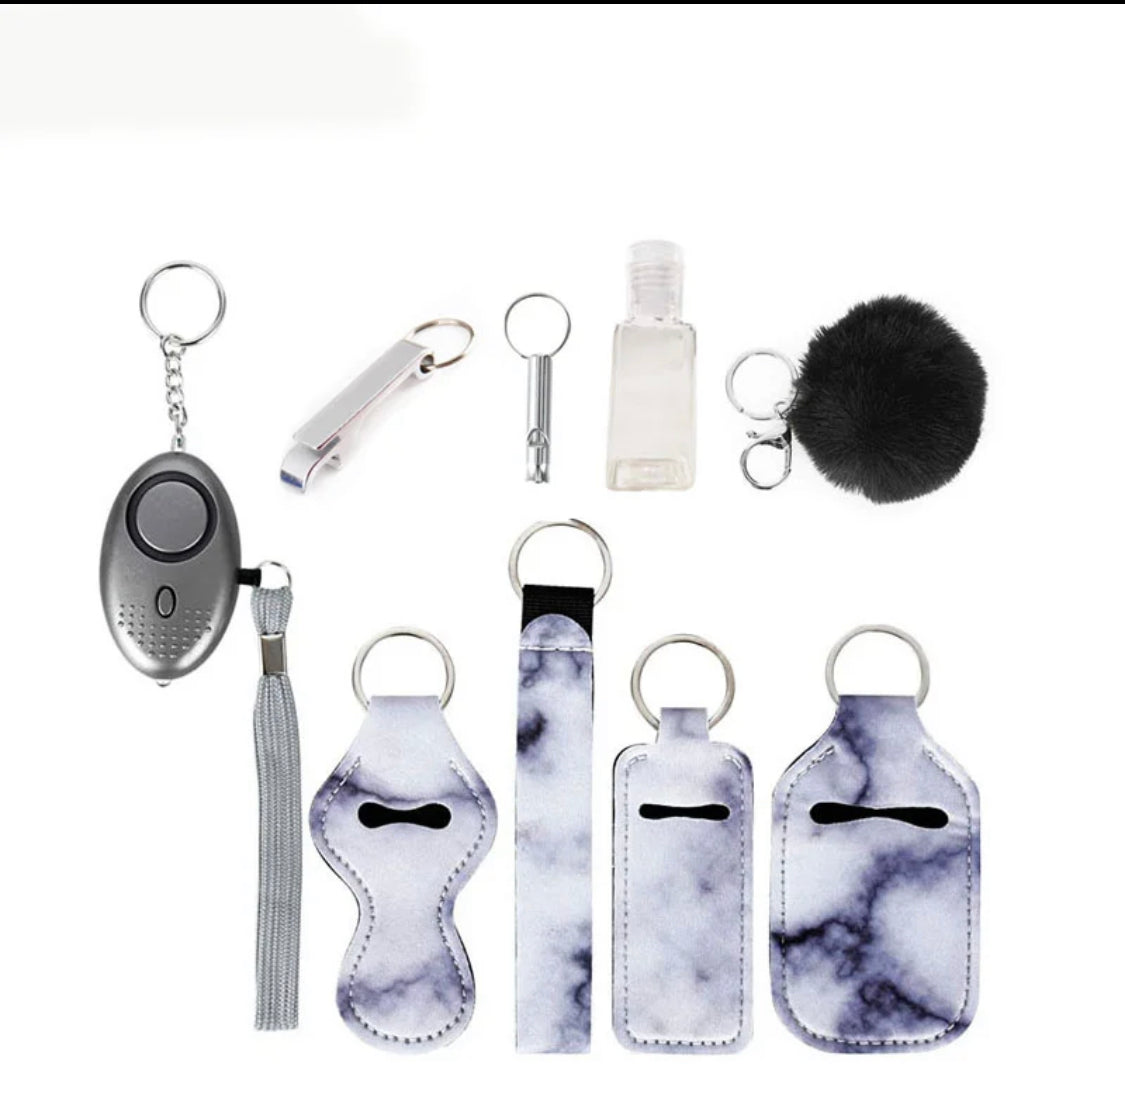 Safety Self Defense Keychains-Gray (includes kubotan -not shown)